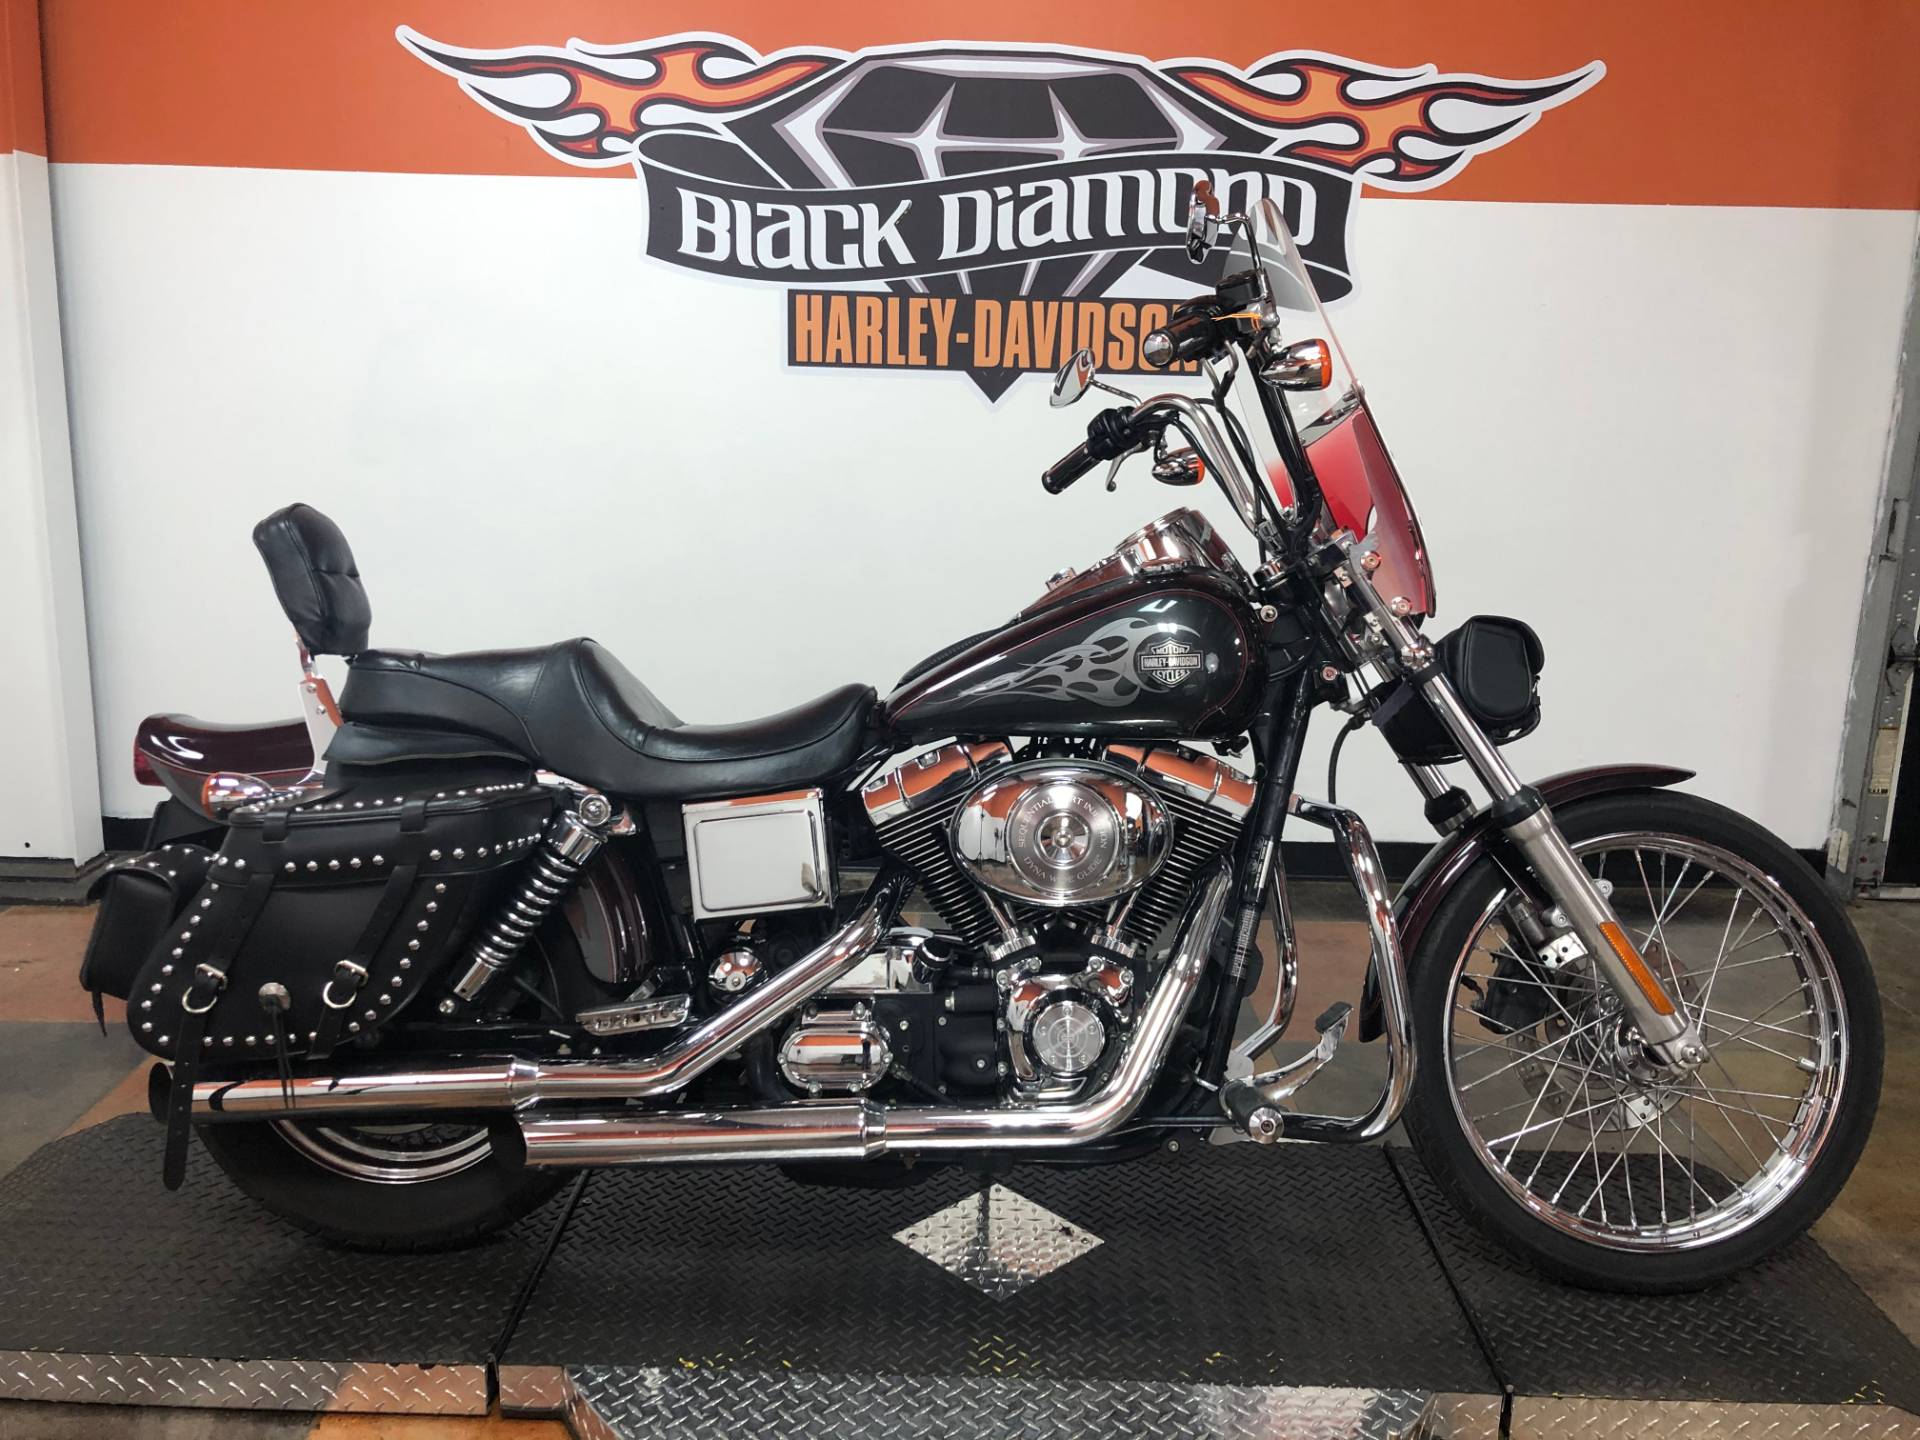 Used 2005 Harley Davidson Fxdwg Fxdwgi Dyna Wide Glide Two Tone Black Cherry Pearl Black Pearl Motorcycles In Marion Il U317674